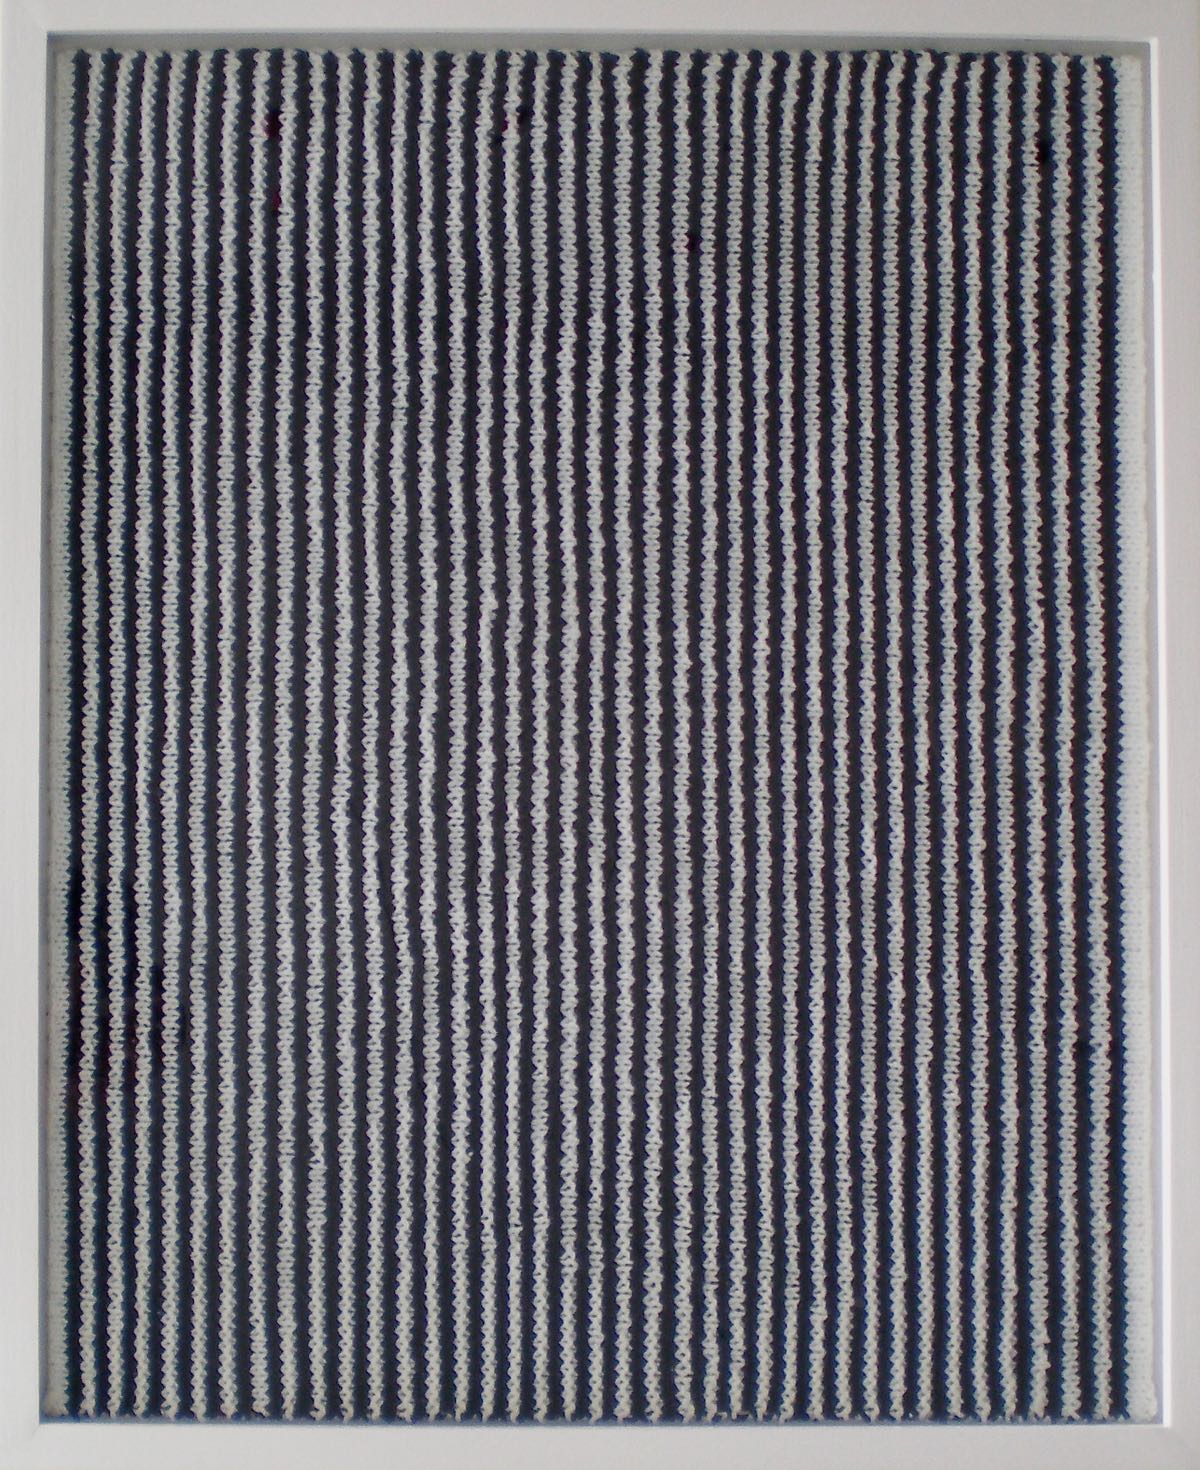  Pierre Fouché. Aime-moi moins, mais aime-moi longtemps. 2007. Acrylic knitting yarn, perspex, 550 x 480mm. Private Collection.